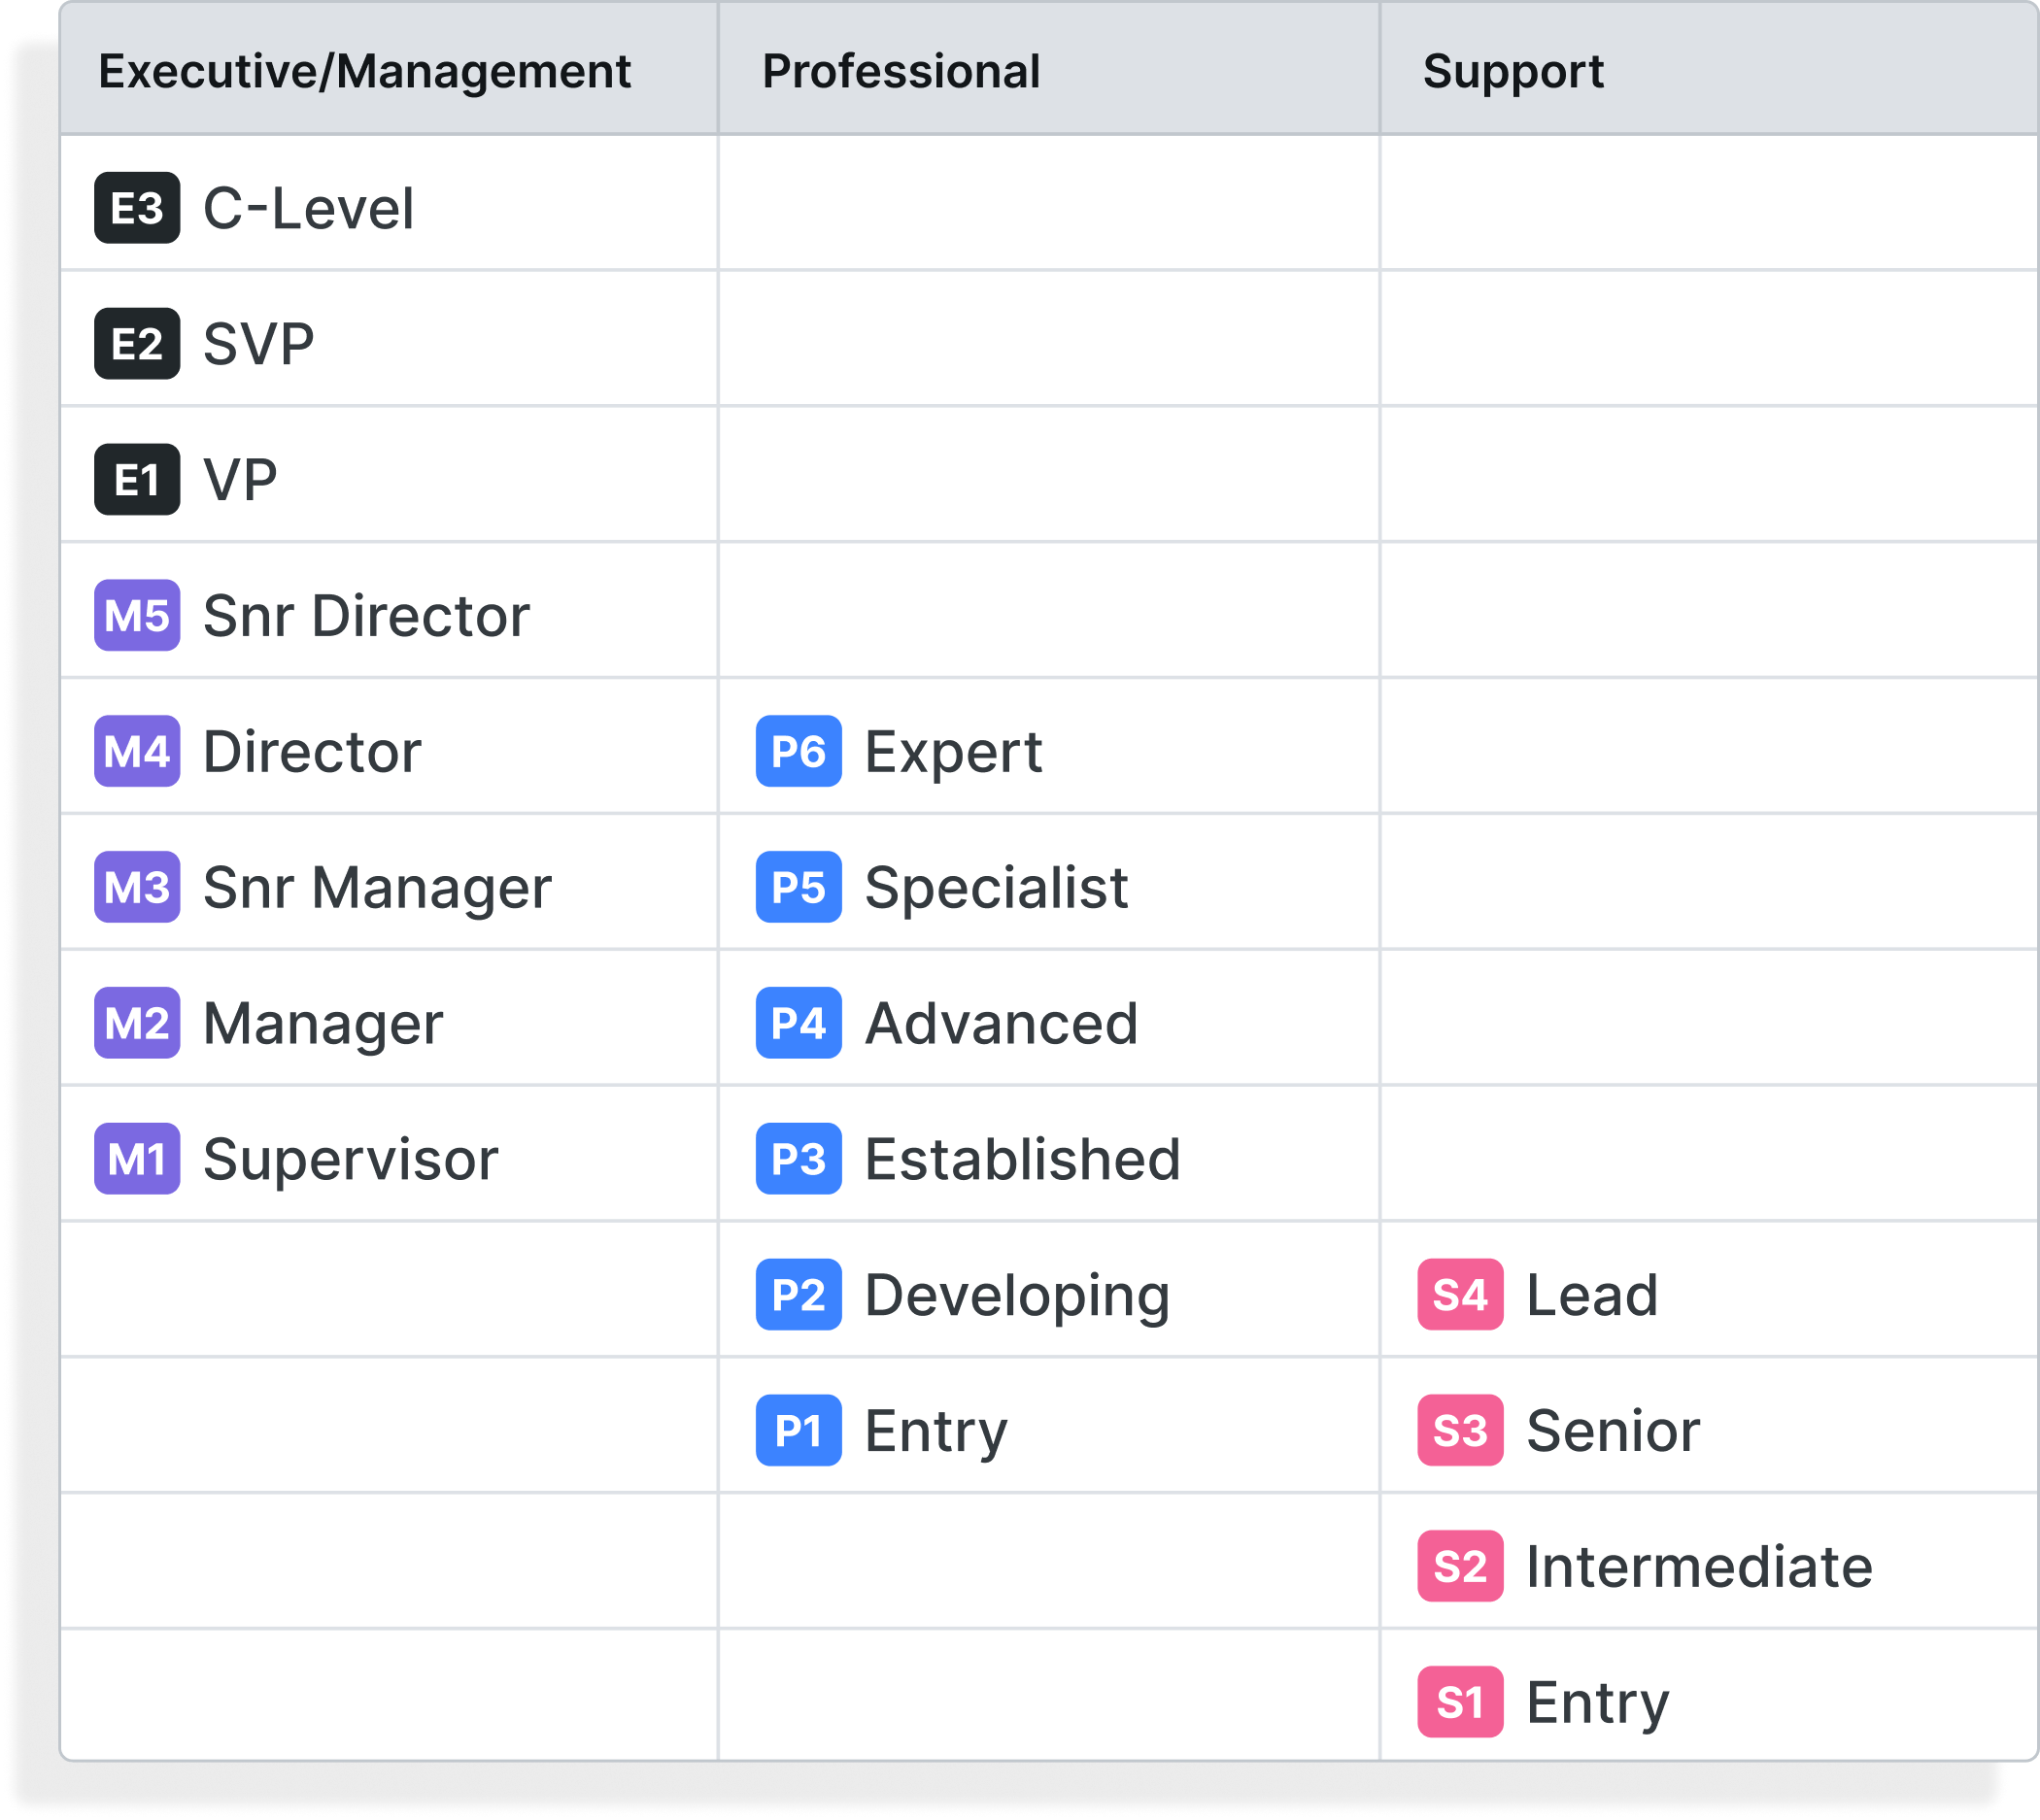 Table showing Ravio's level framework across executive, management, professional, and support roles.